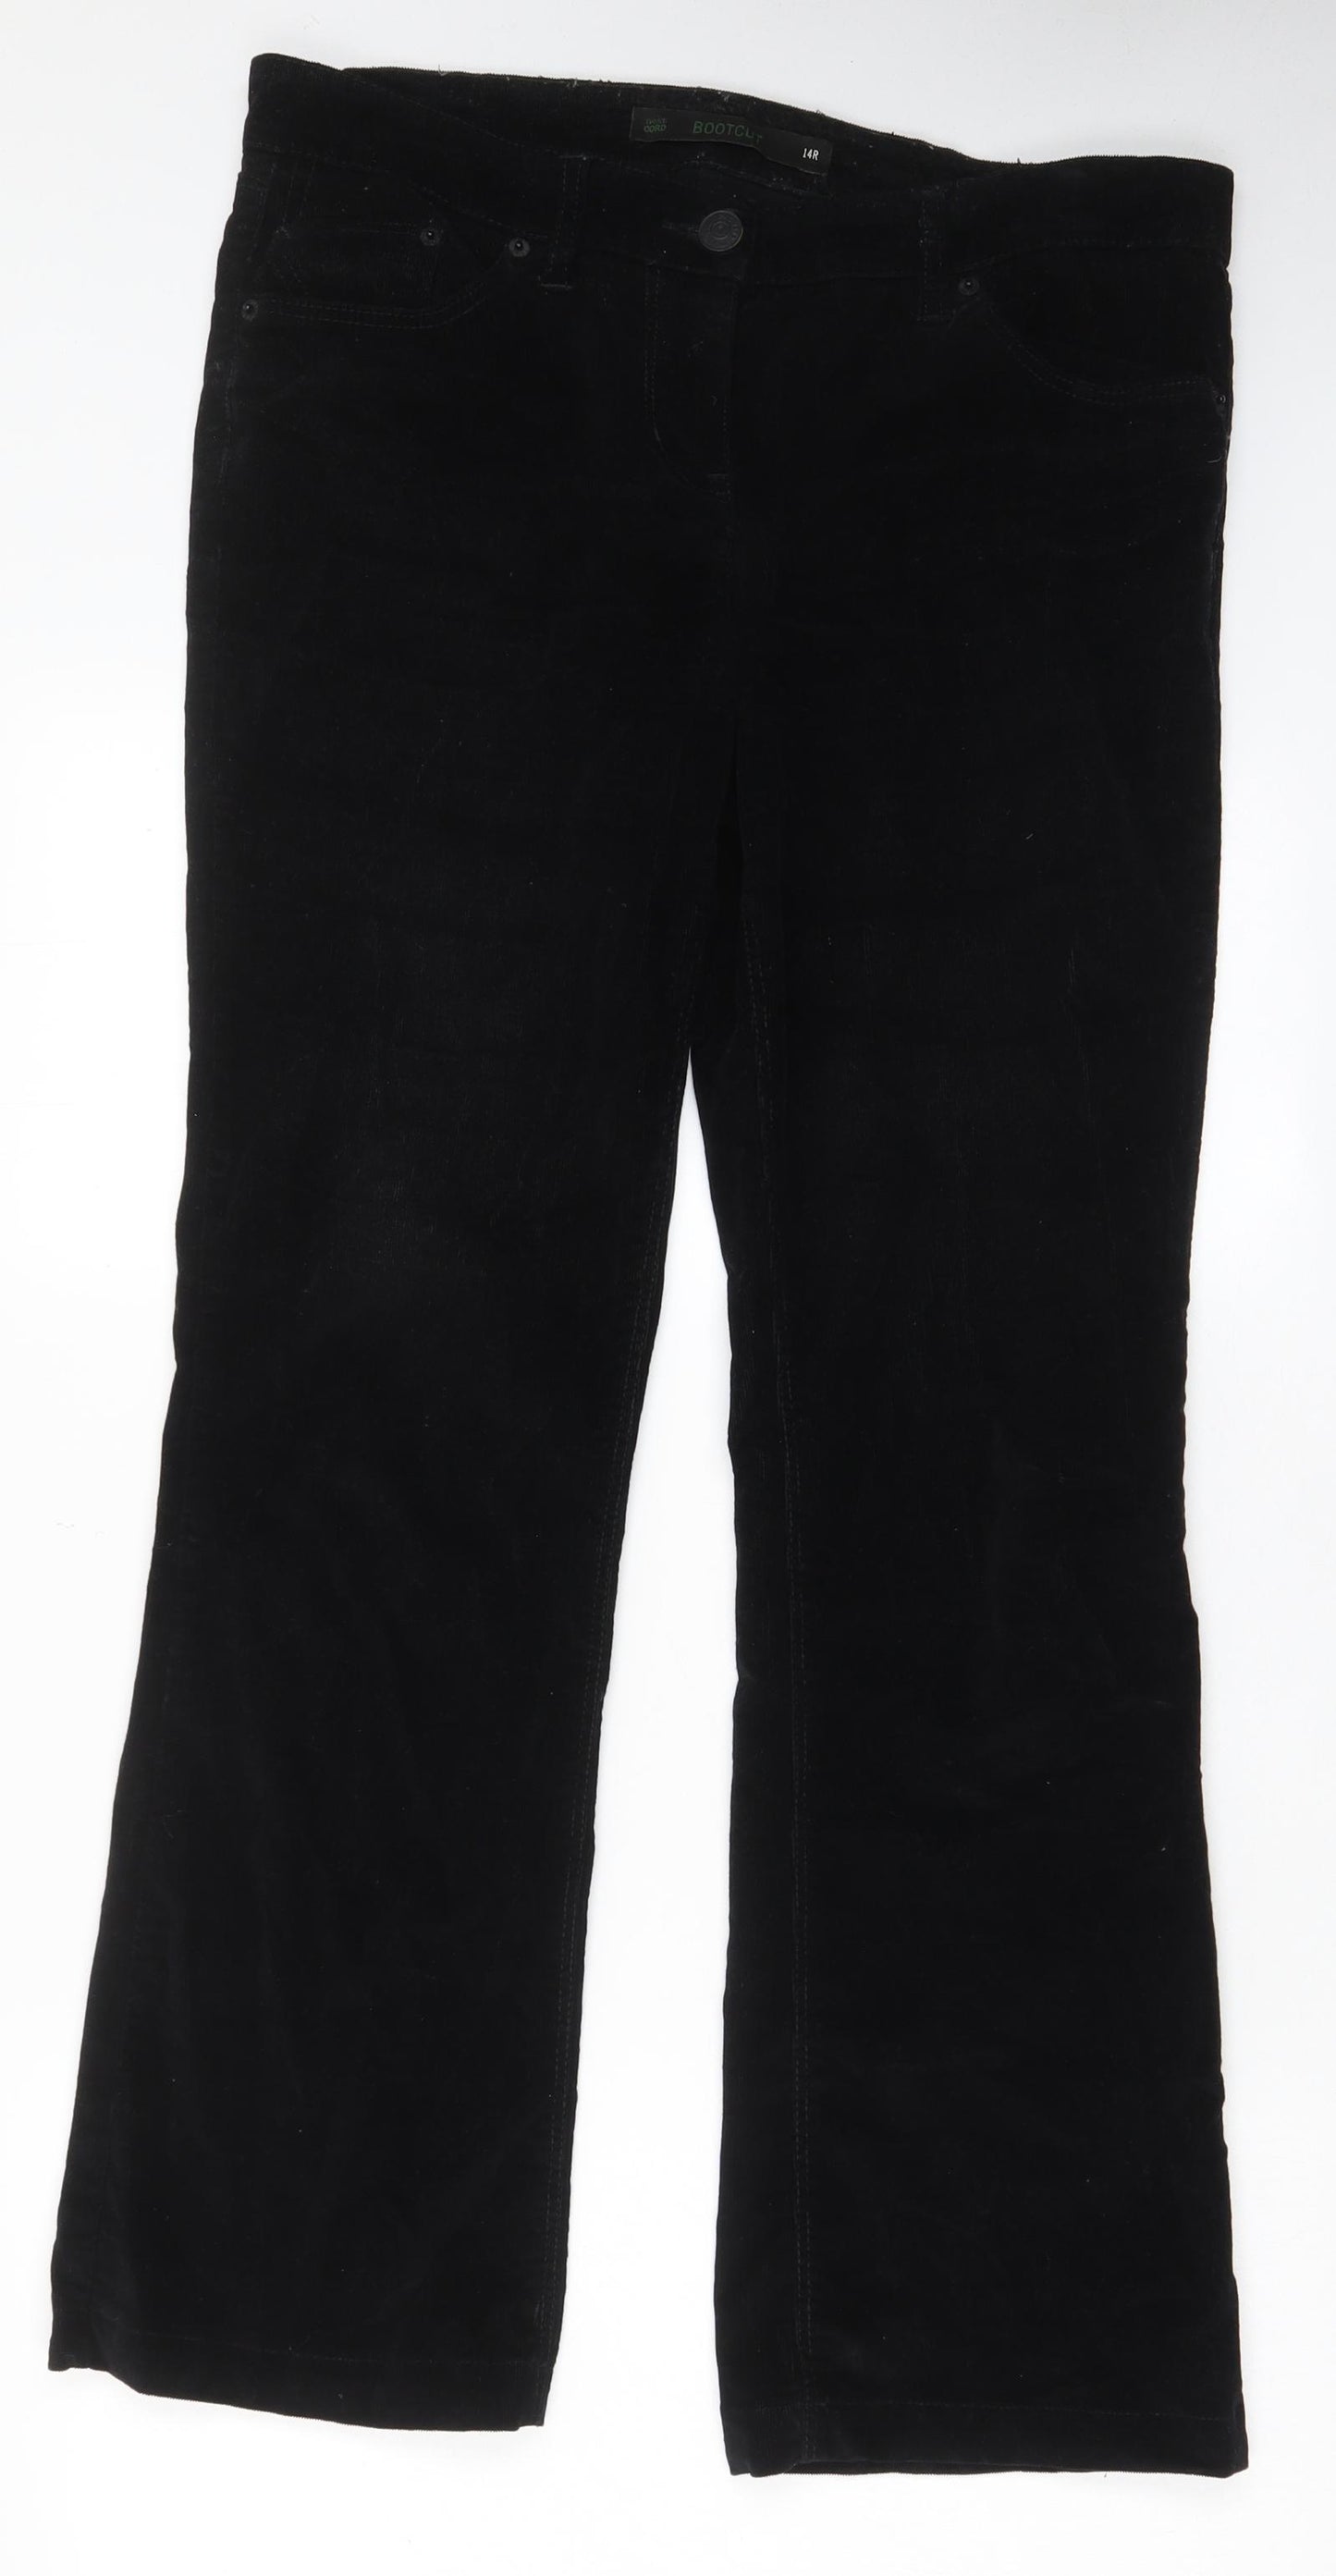 NEXT Womens Black Cotton Trousers Size 14 L31 in Regular Zip - Pockets